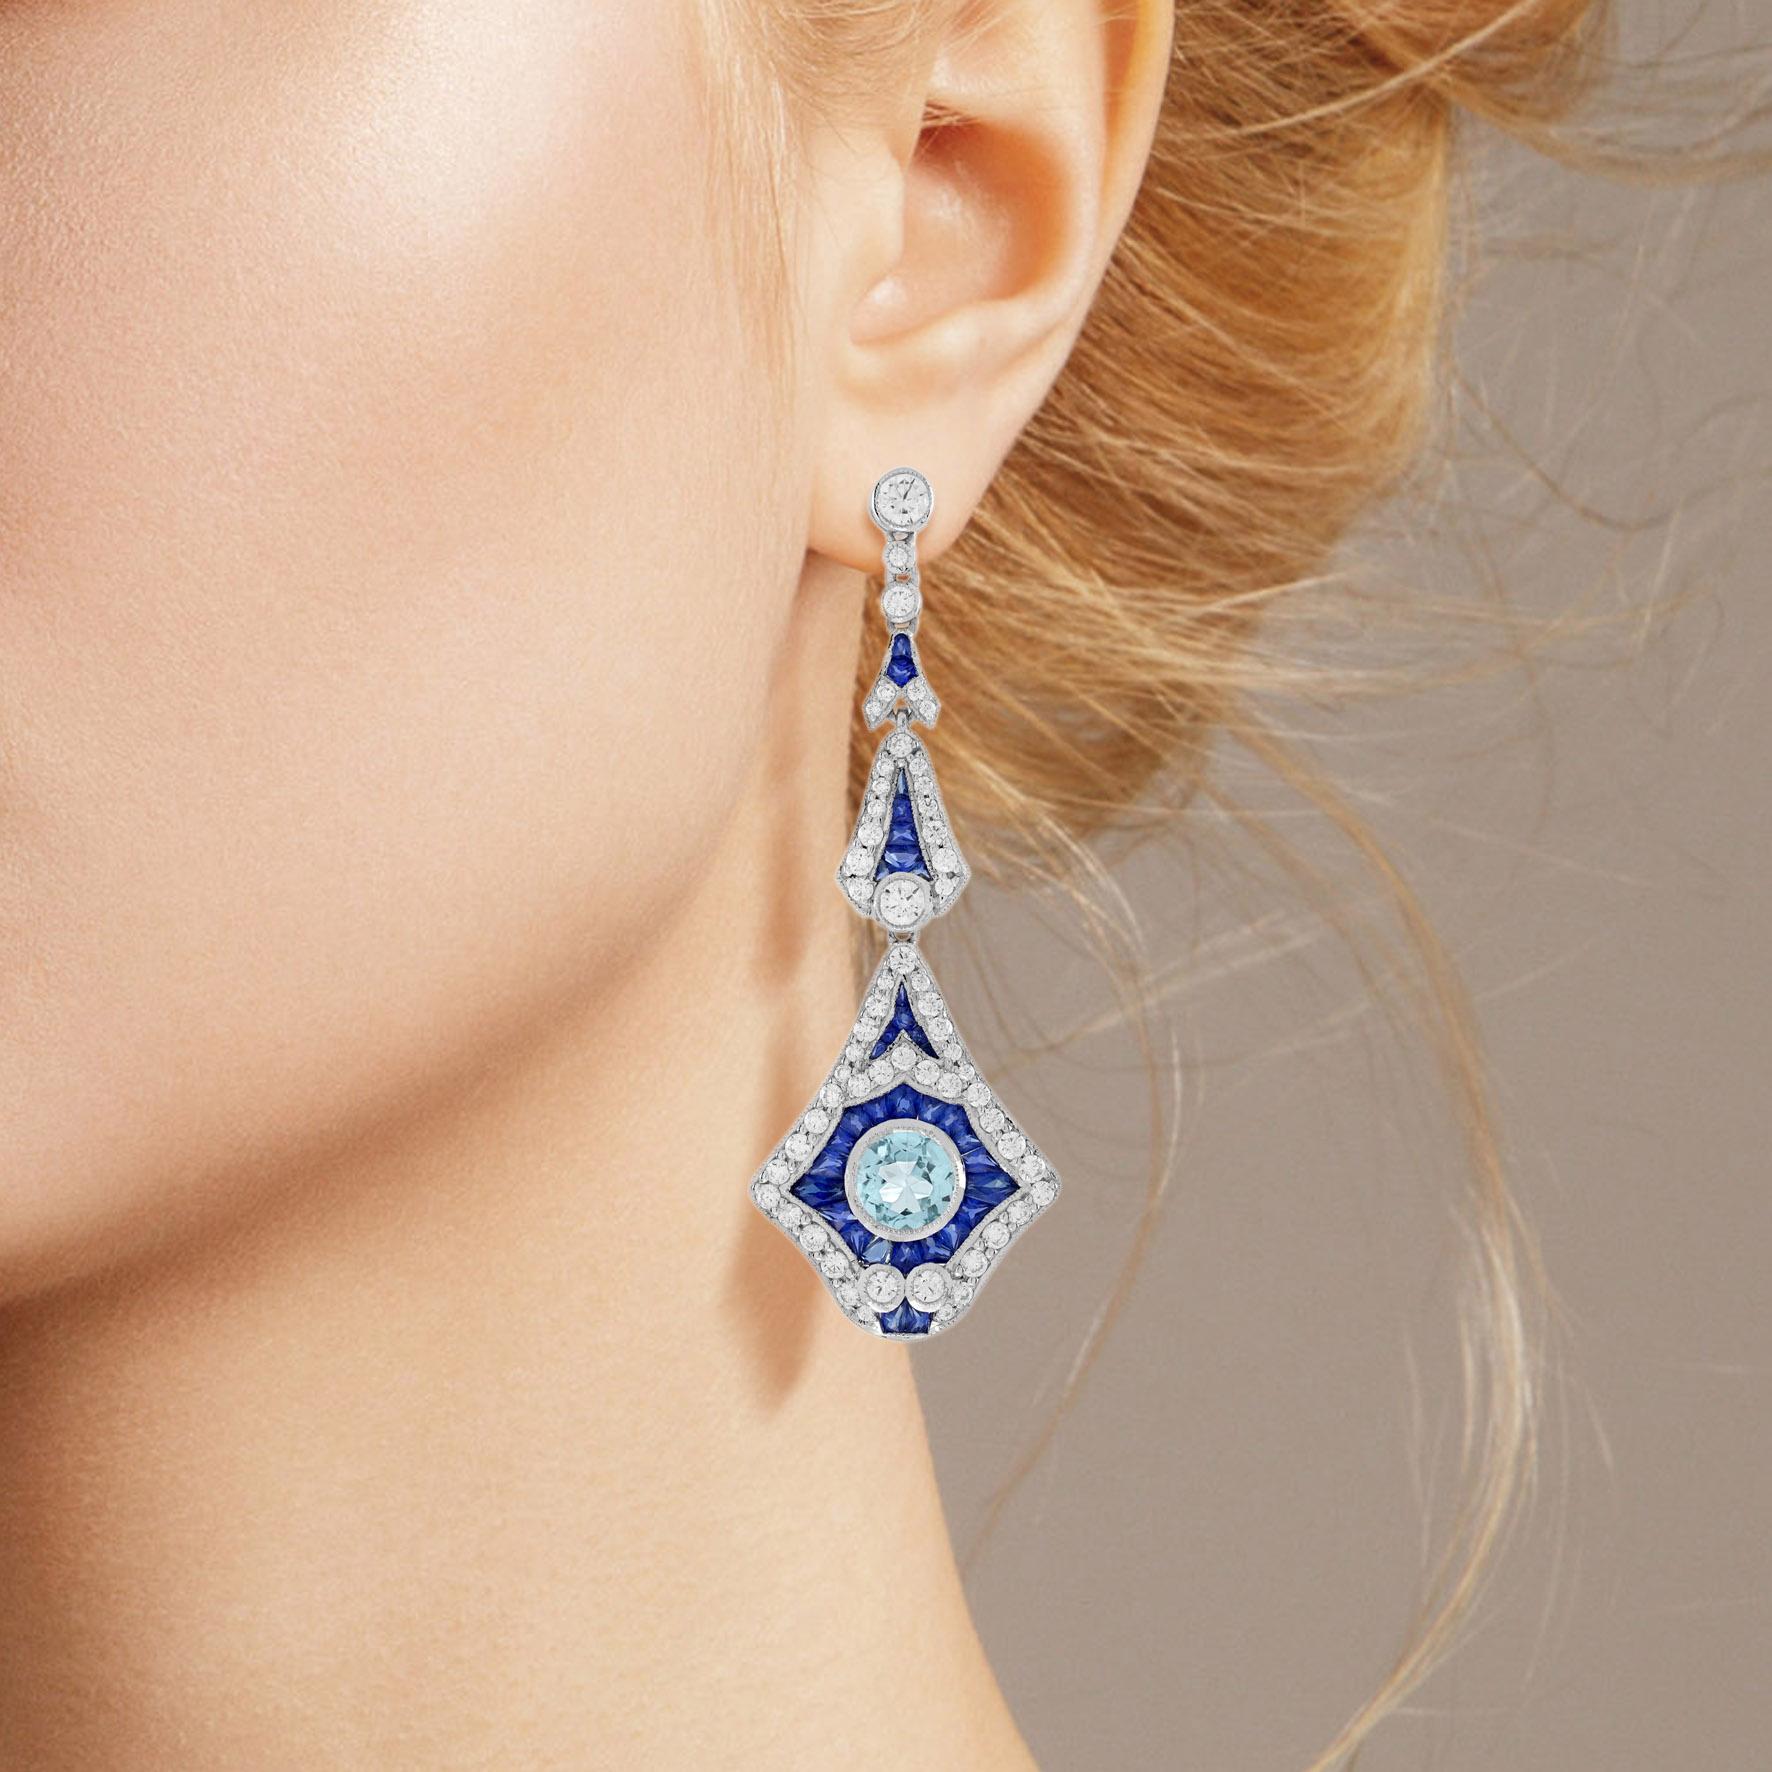 A fabulous pair of Art Deco inspired drop earrings decorated with round aquamarines in their centers, accented with French cut blue sapphires and glittering diamonds. Measuring about 56 mm. long, they are crafted in 18k white gold with fine milgrain